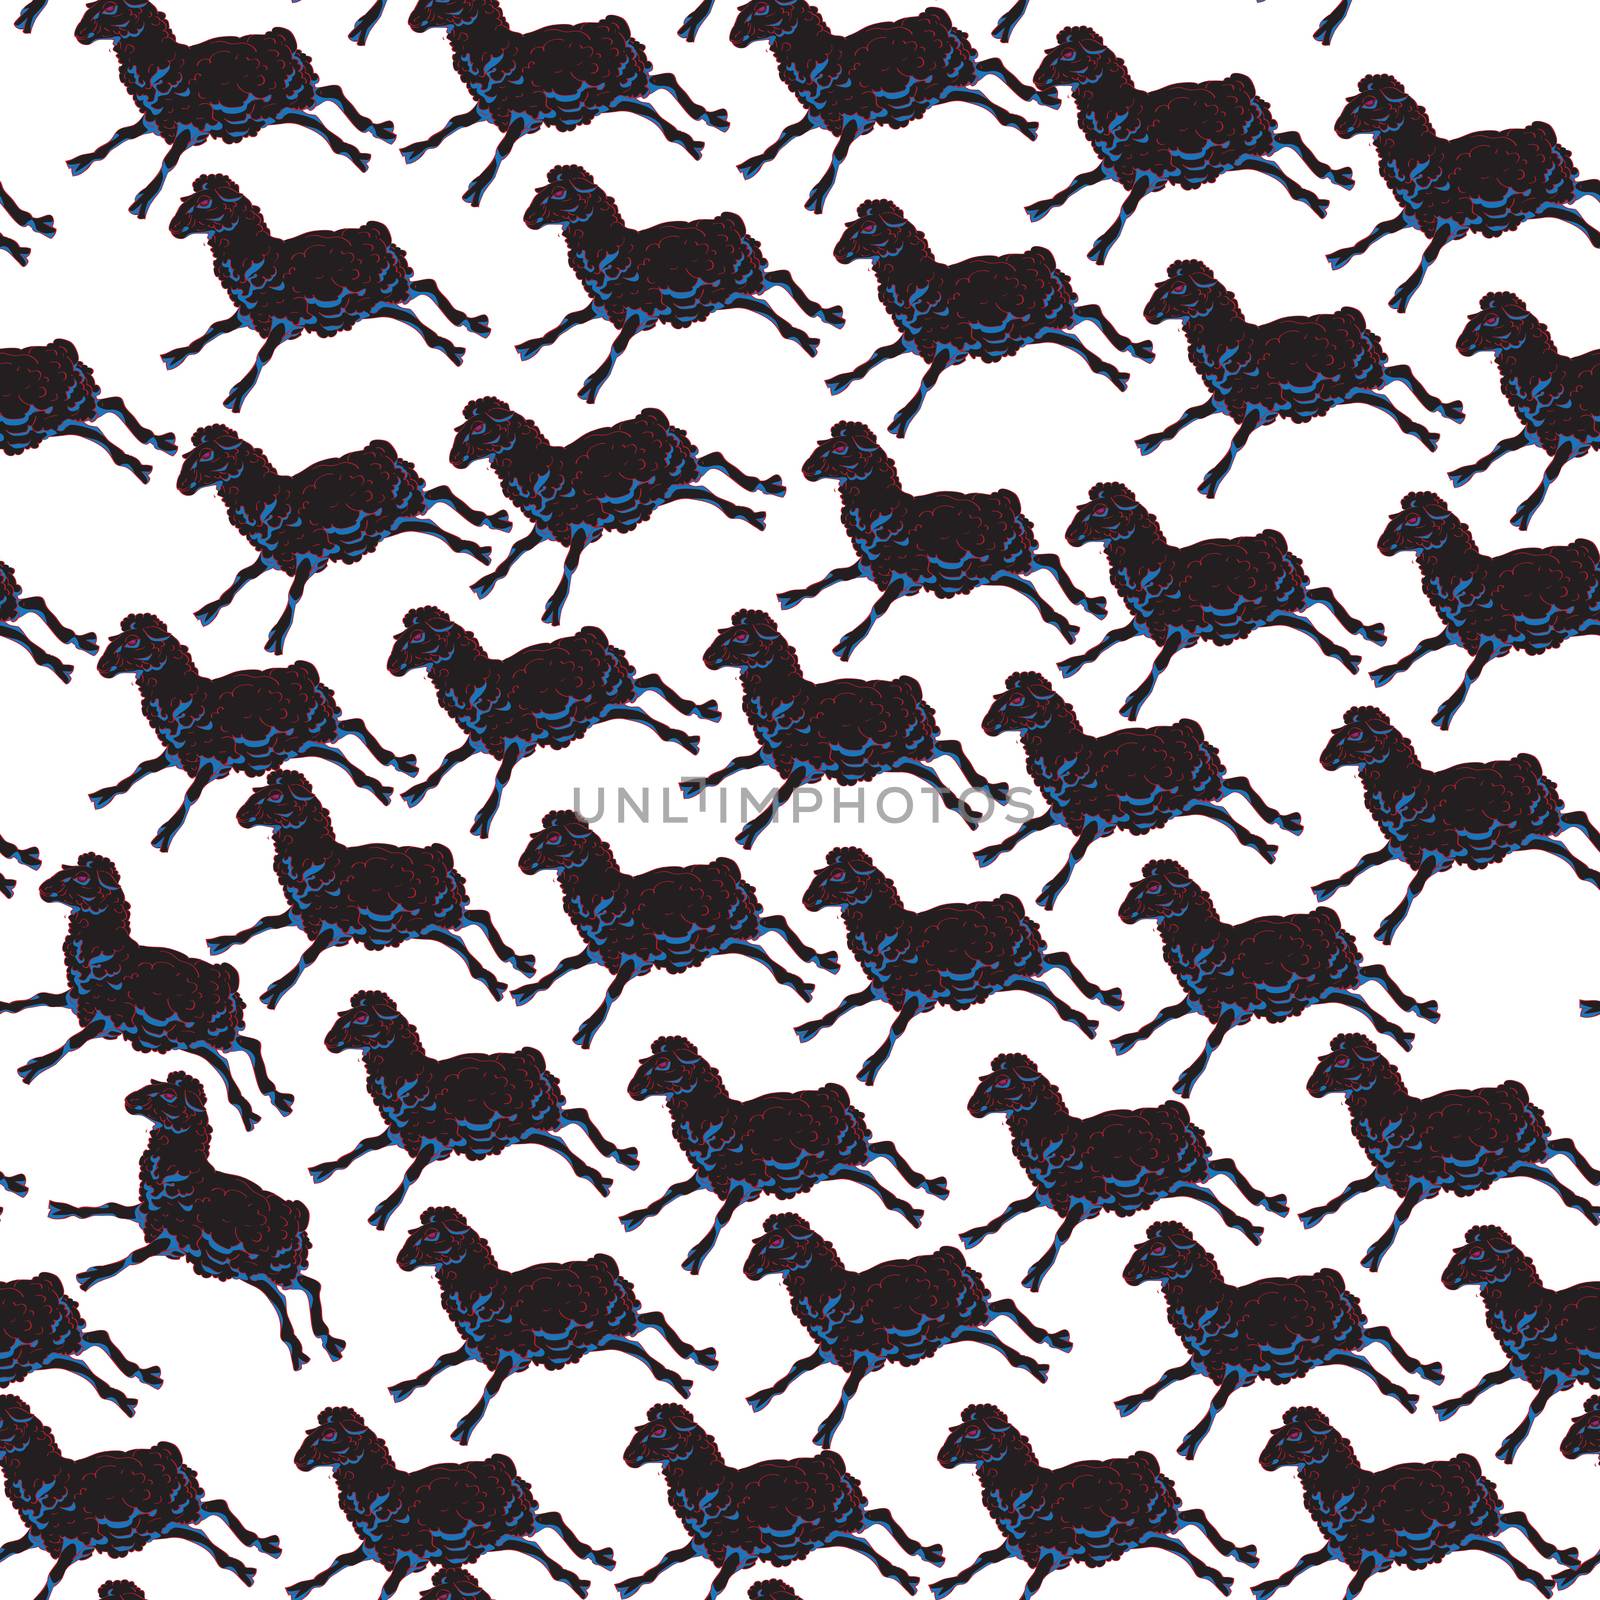 Seamless pattern with the same black sheep in different positions, doodle illustration over white